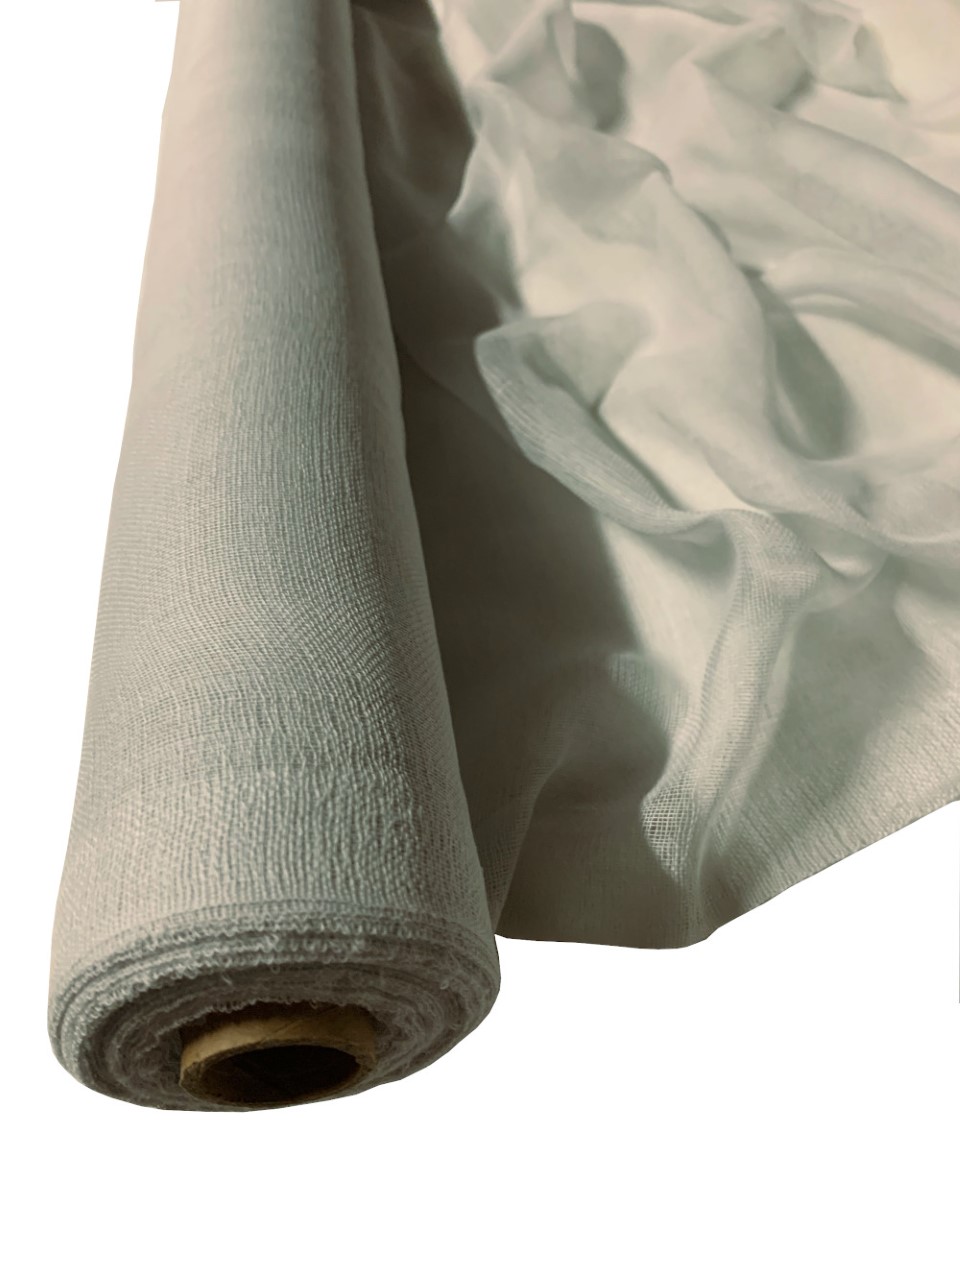 Light Grey Cheesecloth 36" x 100 Foot Roll - 100% Cotton